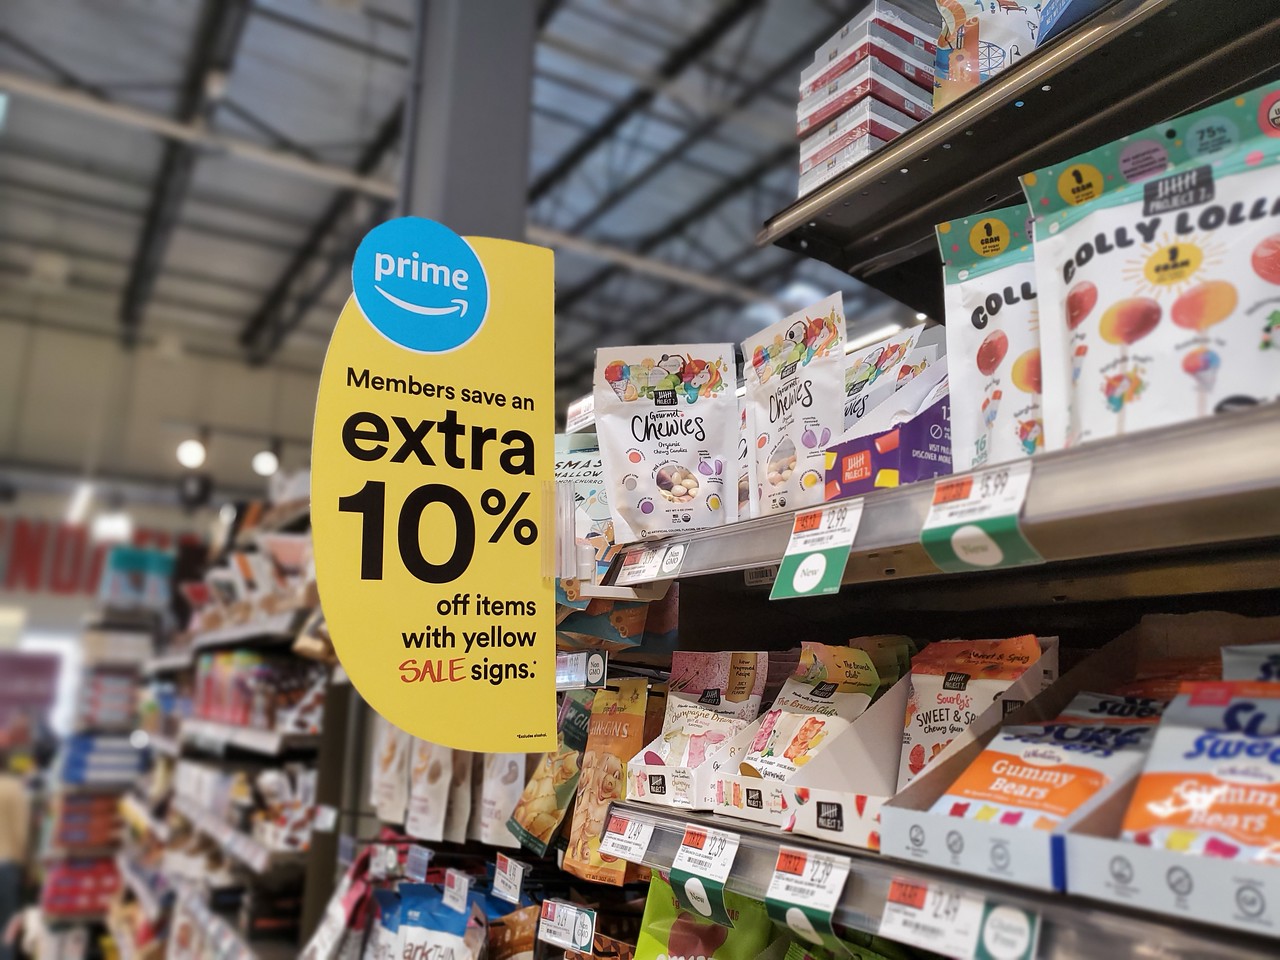 Extra 10% off for Prime members sign in store aisle